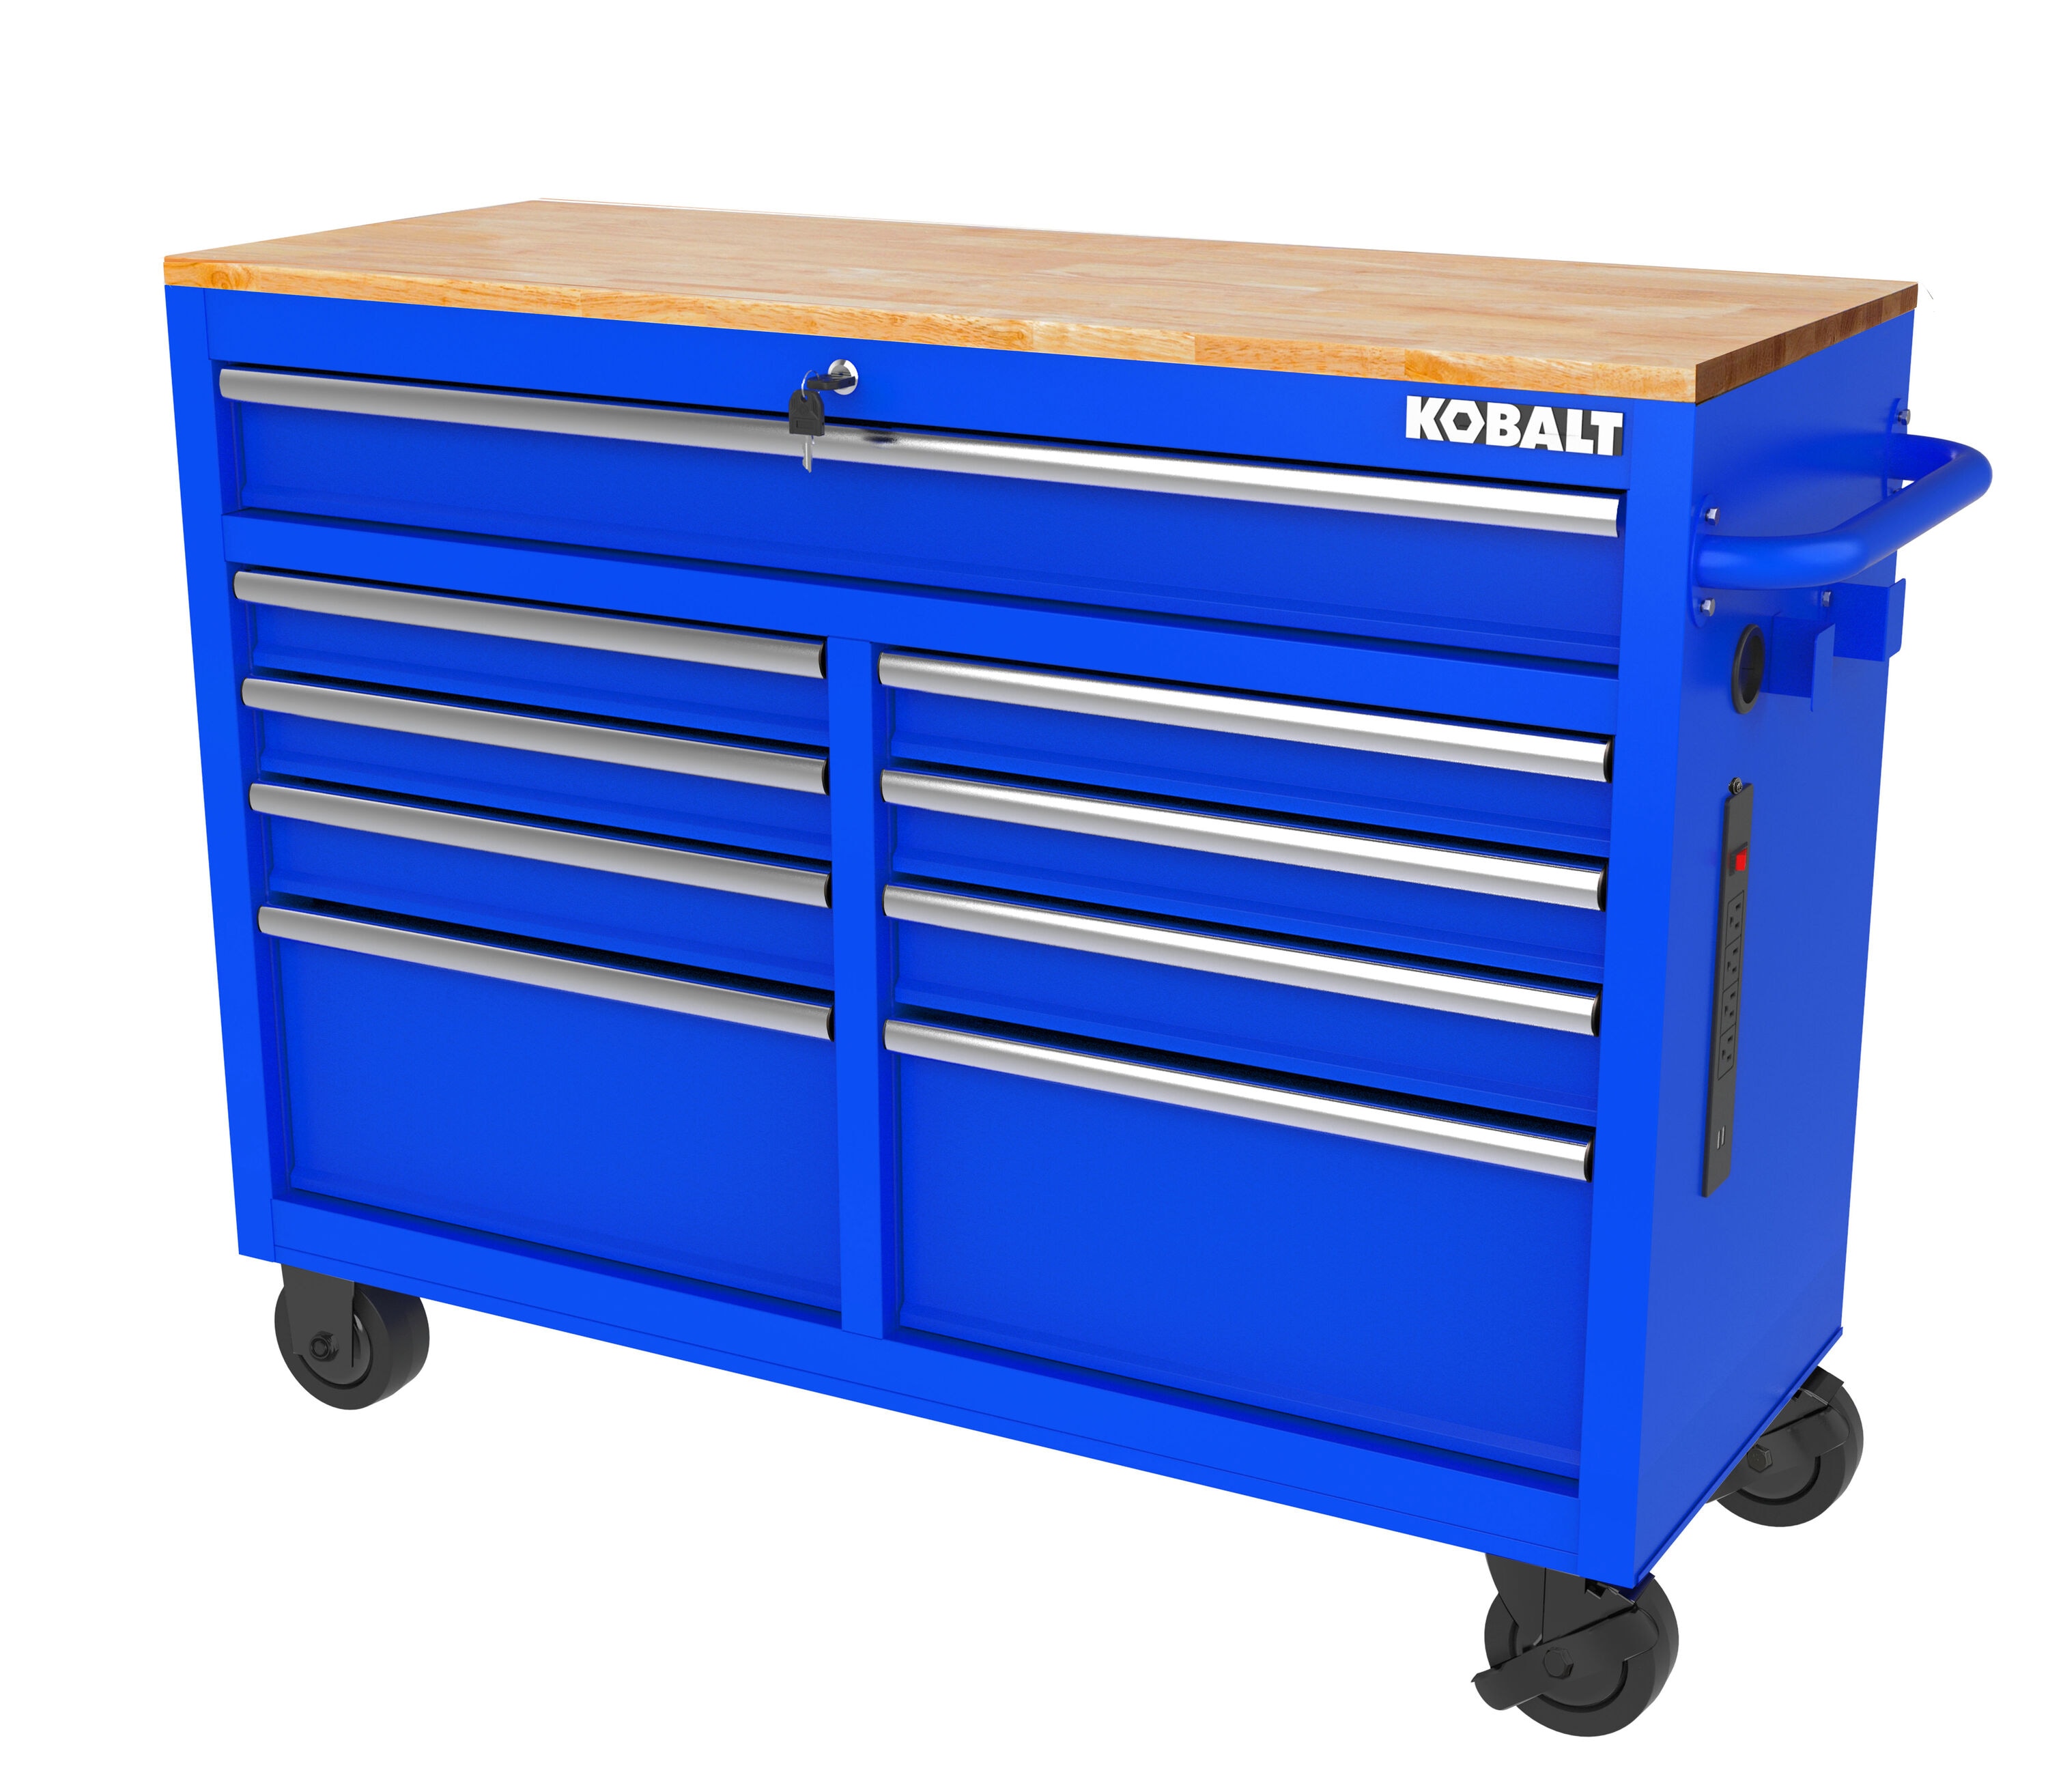 Kobalt 46.1in L x 37.2in H 9Drawers Rolling Blue Wood Work Bench in